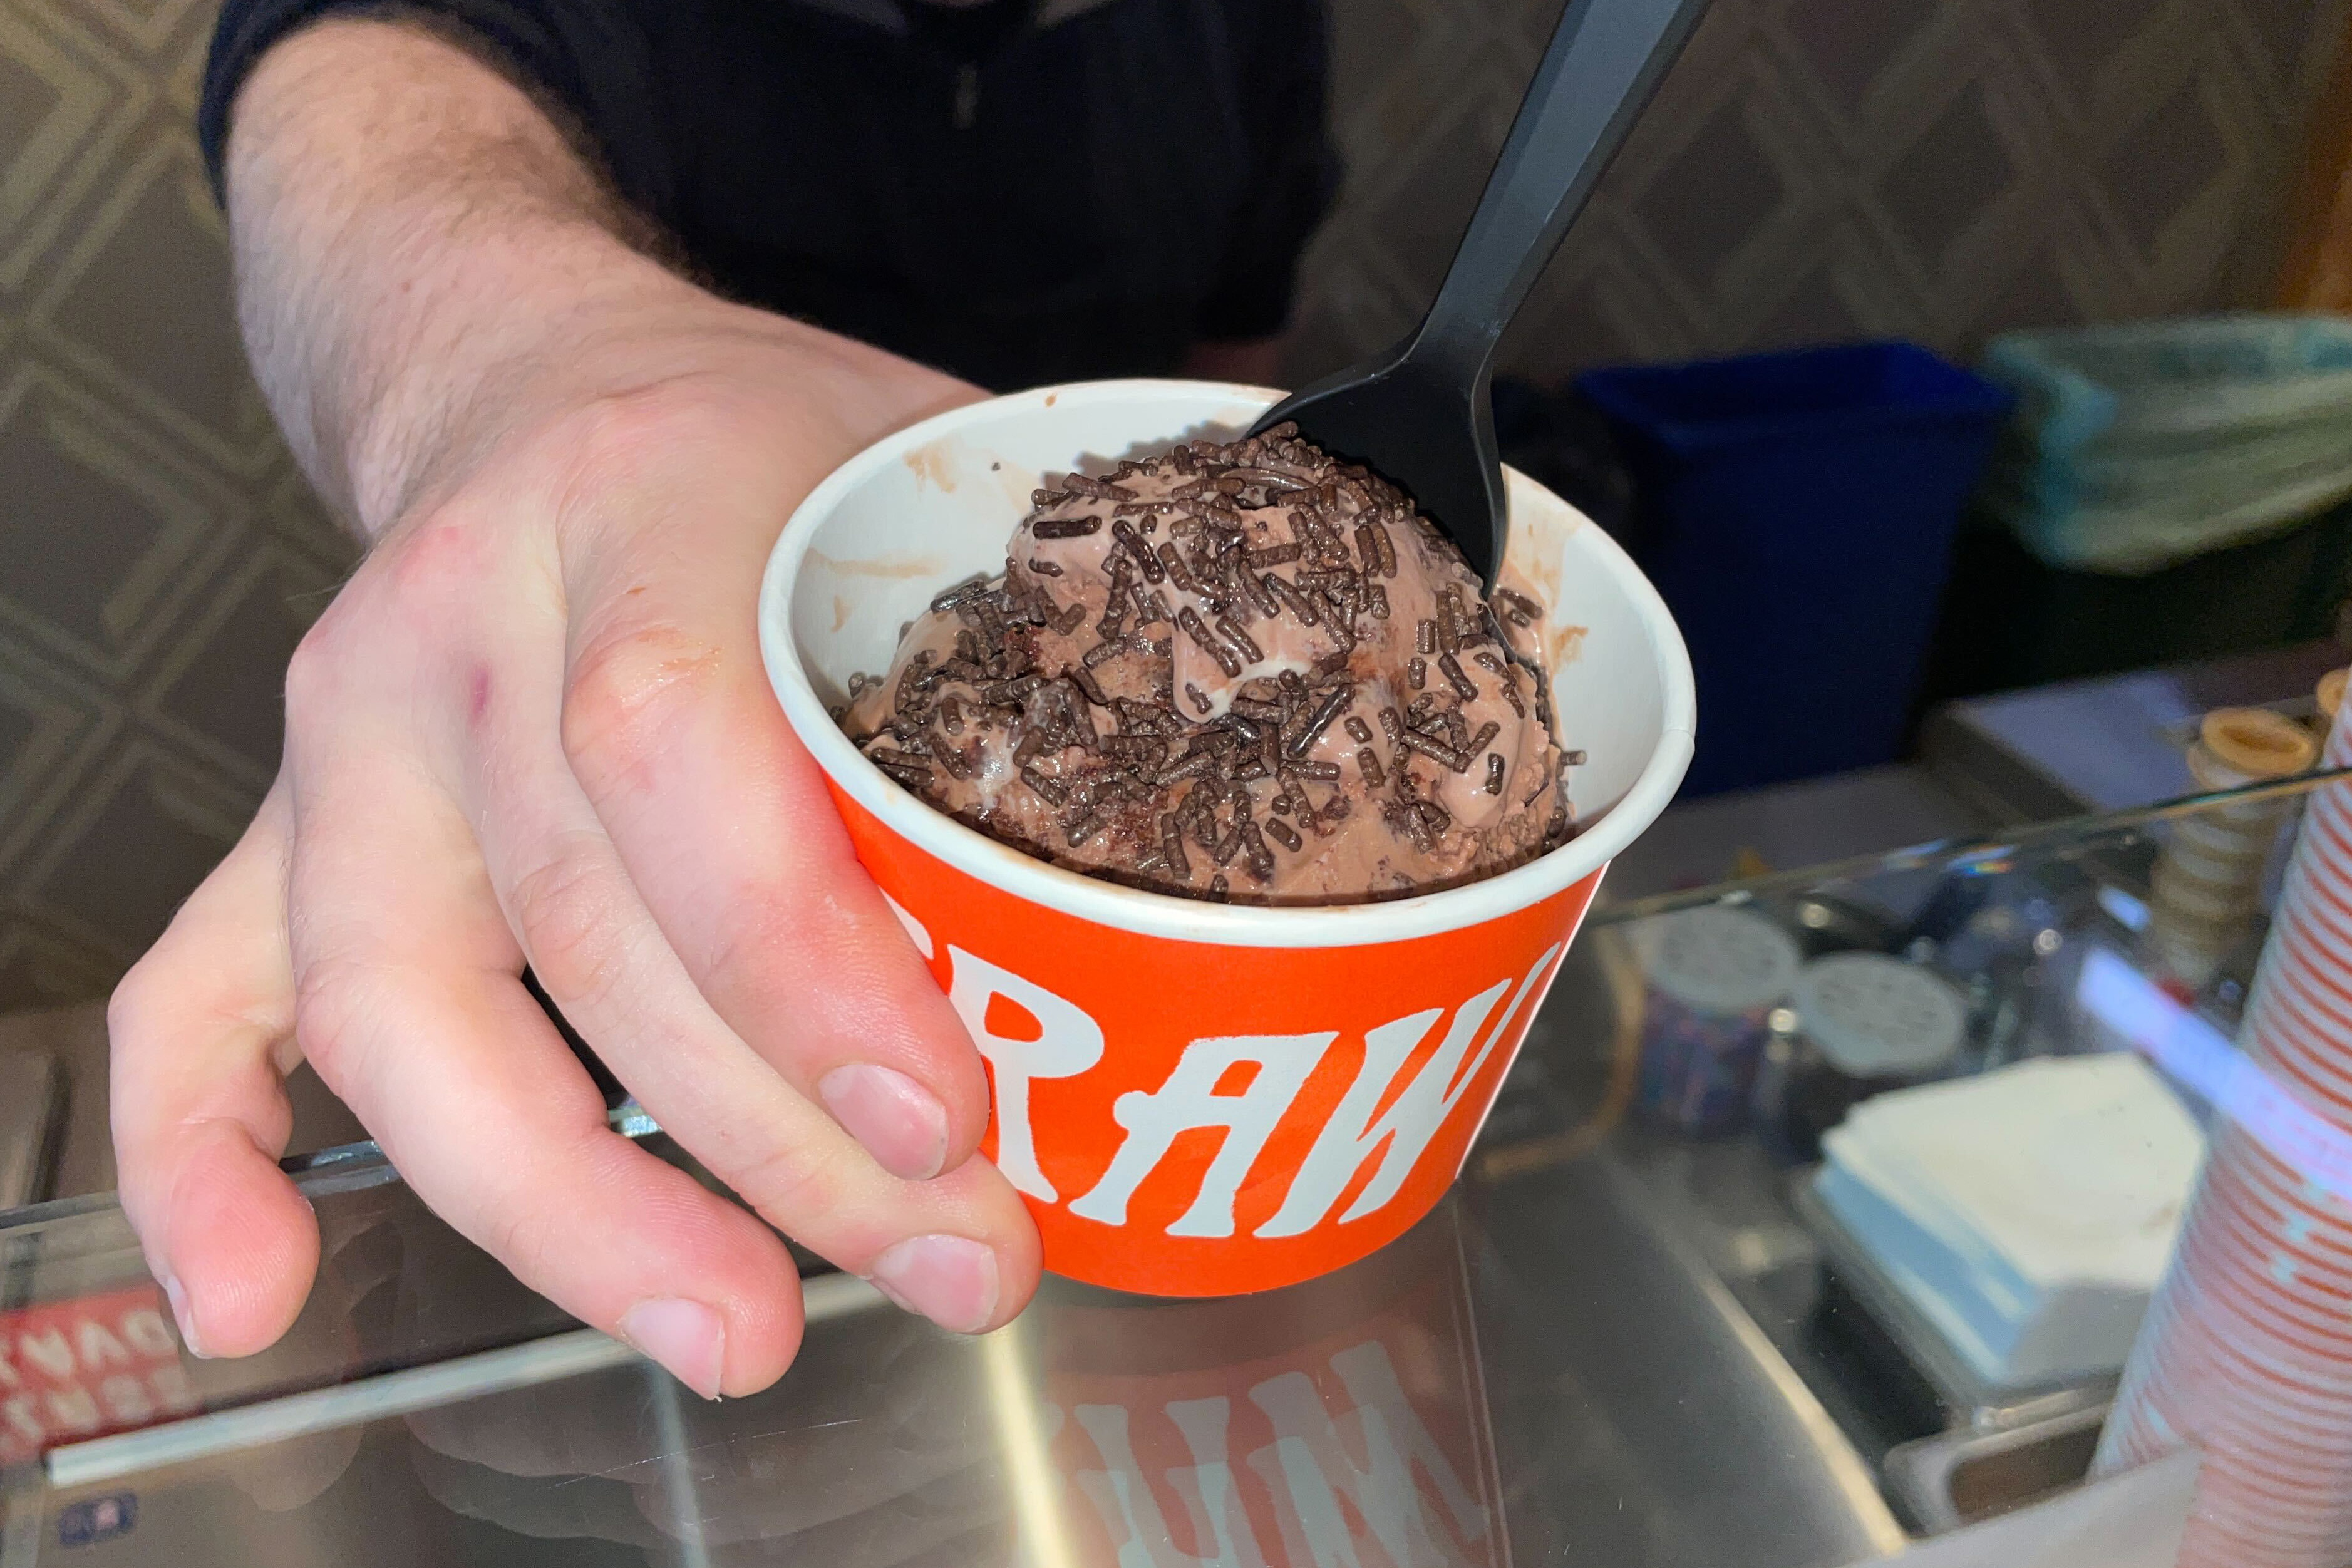 A hand holds a cup of chocolate ice cream with sprinkles, and a black spoon sticks out.